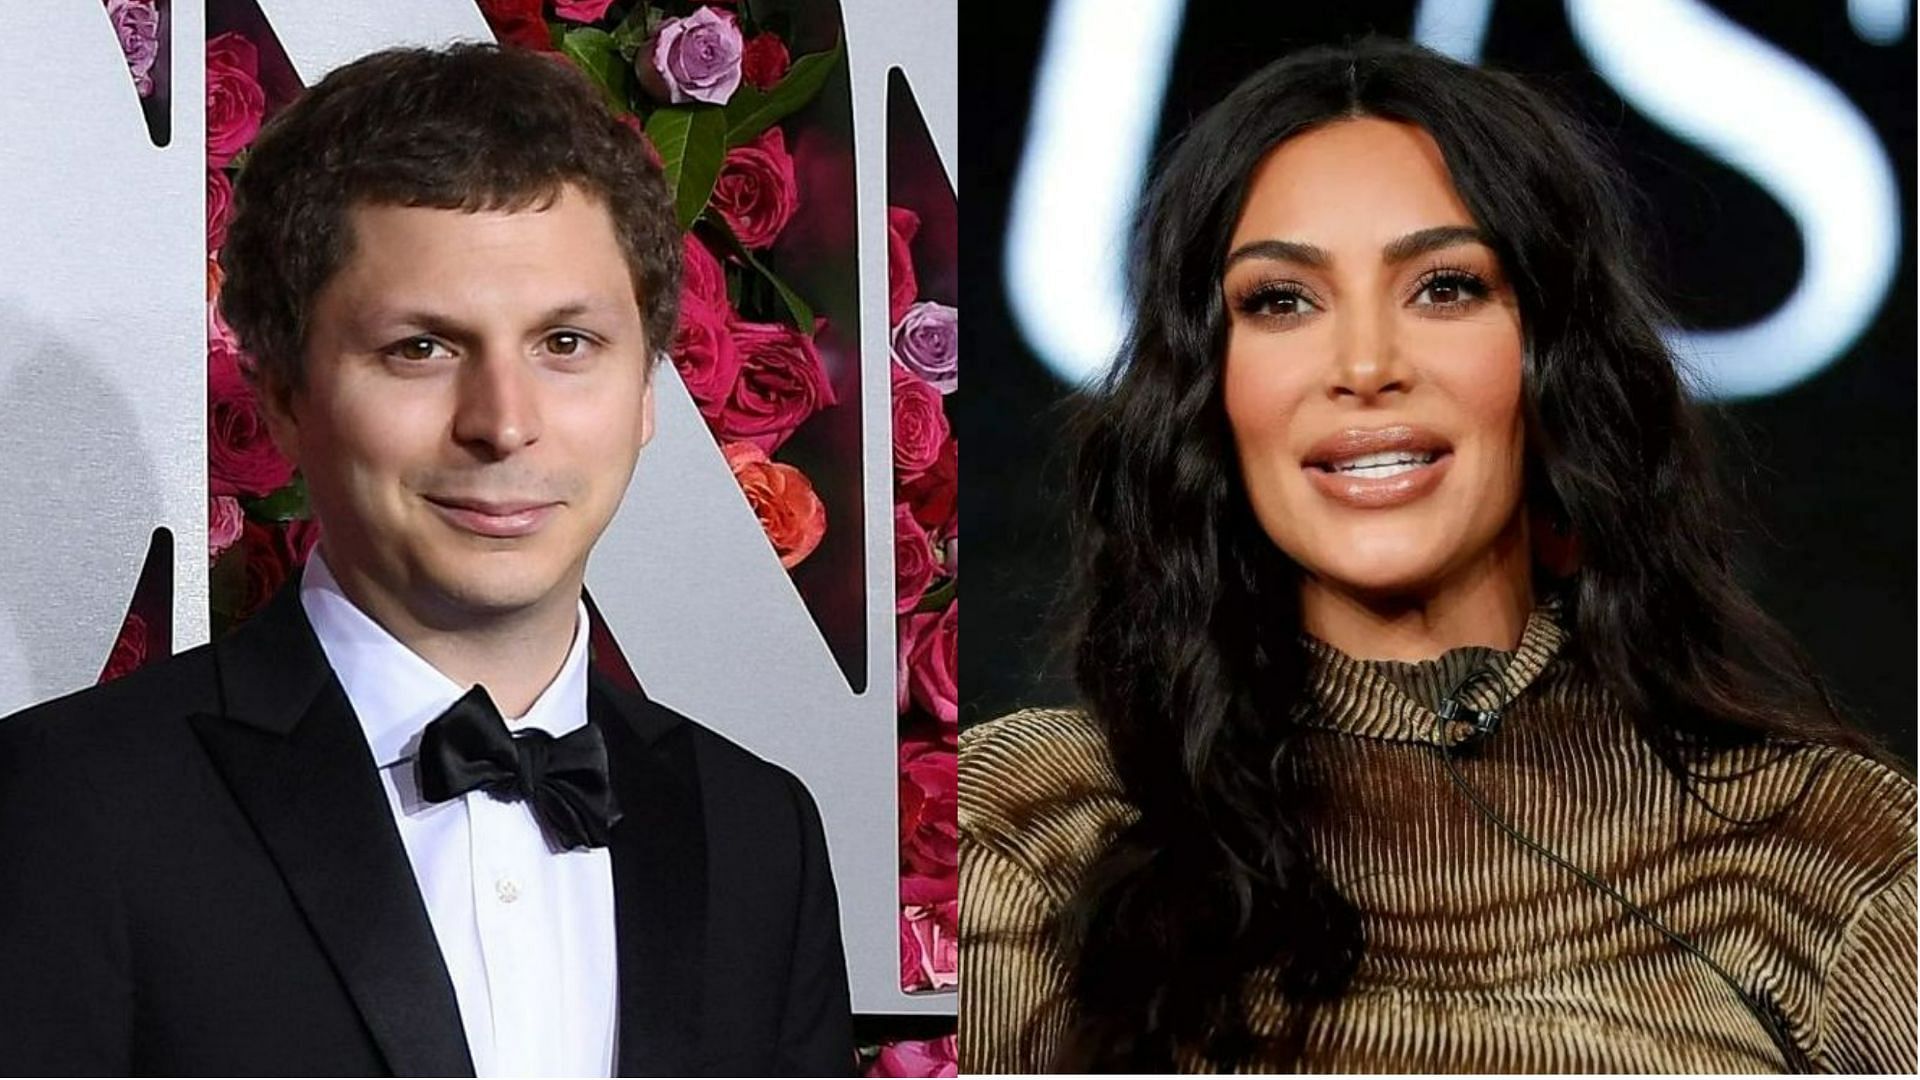 Kim Kardashian and Michael Cera did not date in the past (Image via Getty Images and AP)